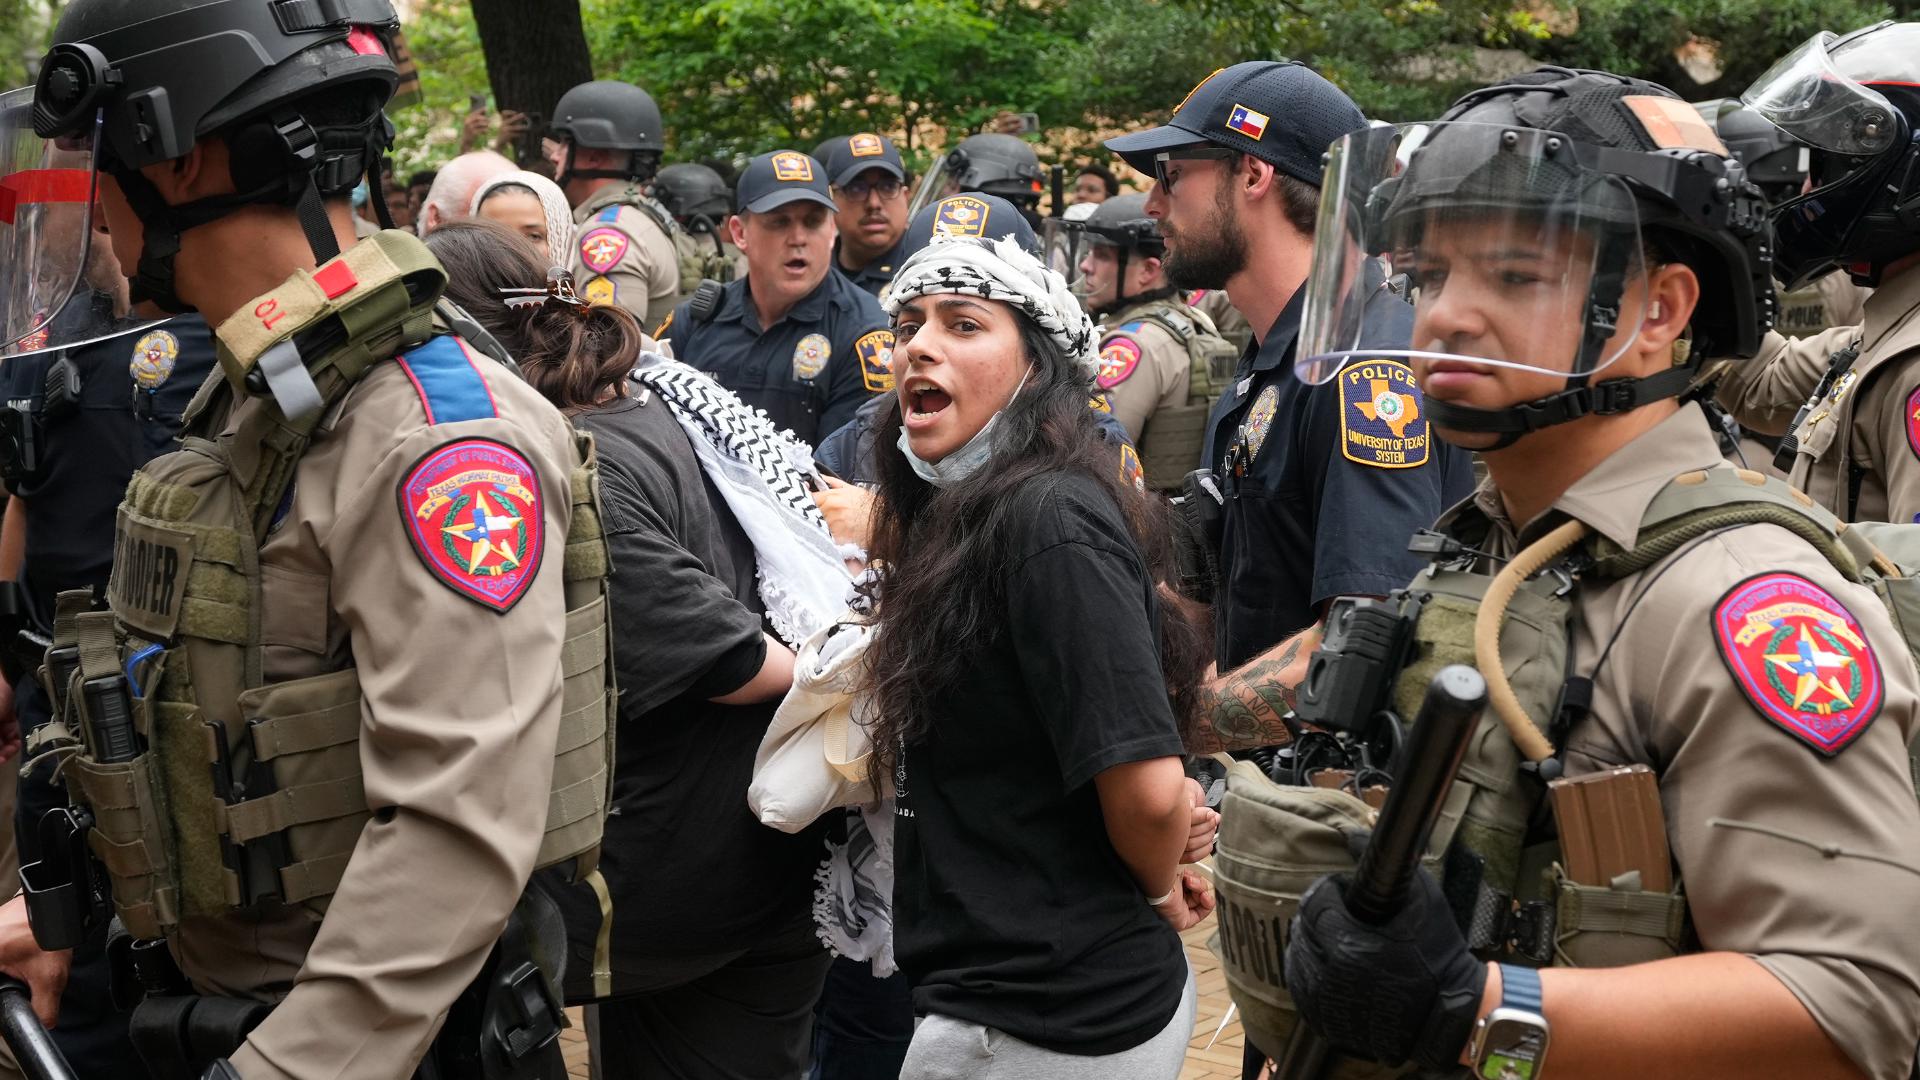 All of the people arrested during the Wednesday protest at the University of Texas at Austin have been released from jail as of Thursday afternoon.